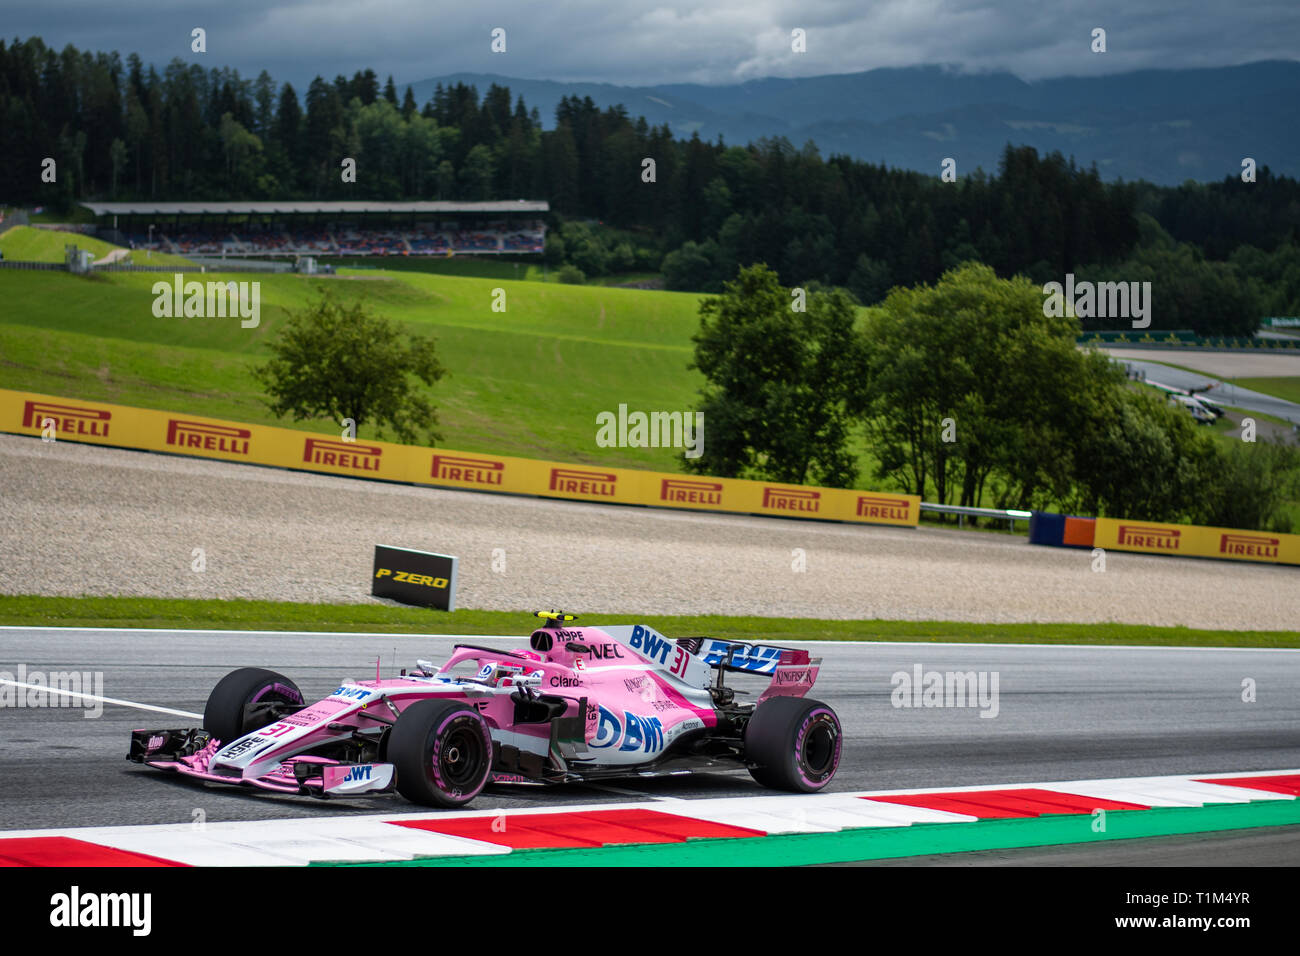 Spielberg/Austria - 06/29/2018 - #31 Esteban OCON (FRA) in his Force India  VJM11 during FP1 ahead of the 2018 Austrian Grand Prix at the Red Bull Ring  Stock Photo - Alamy